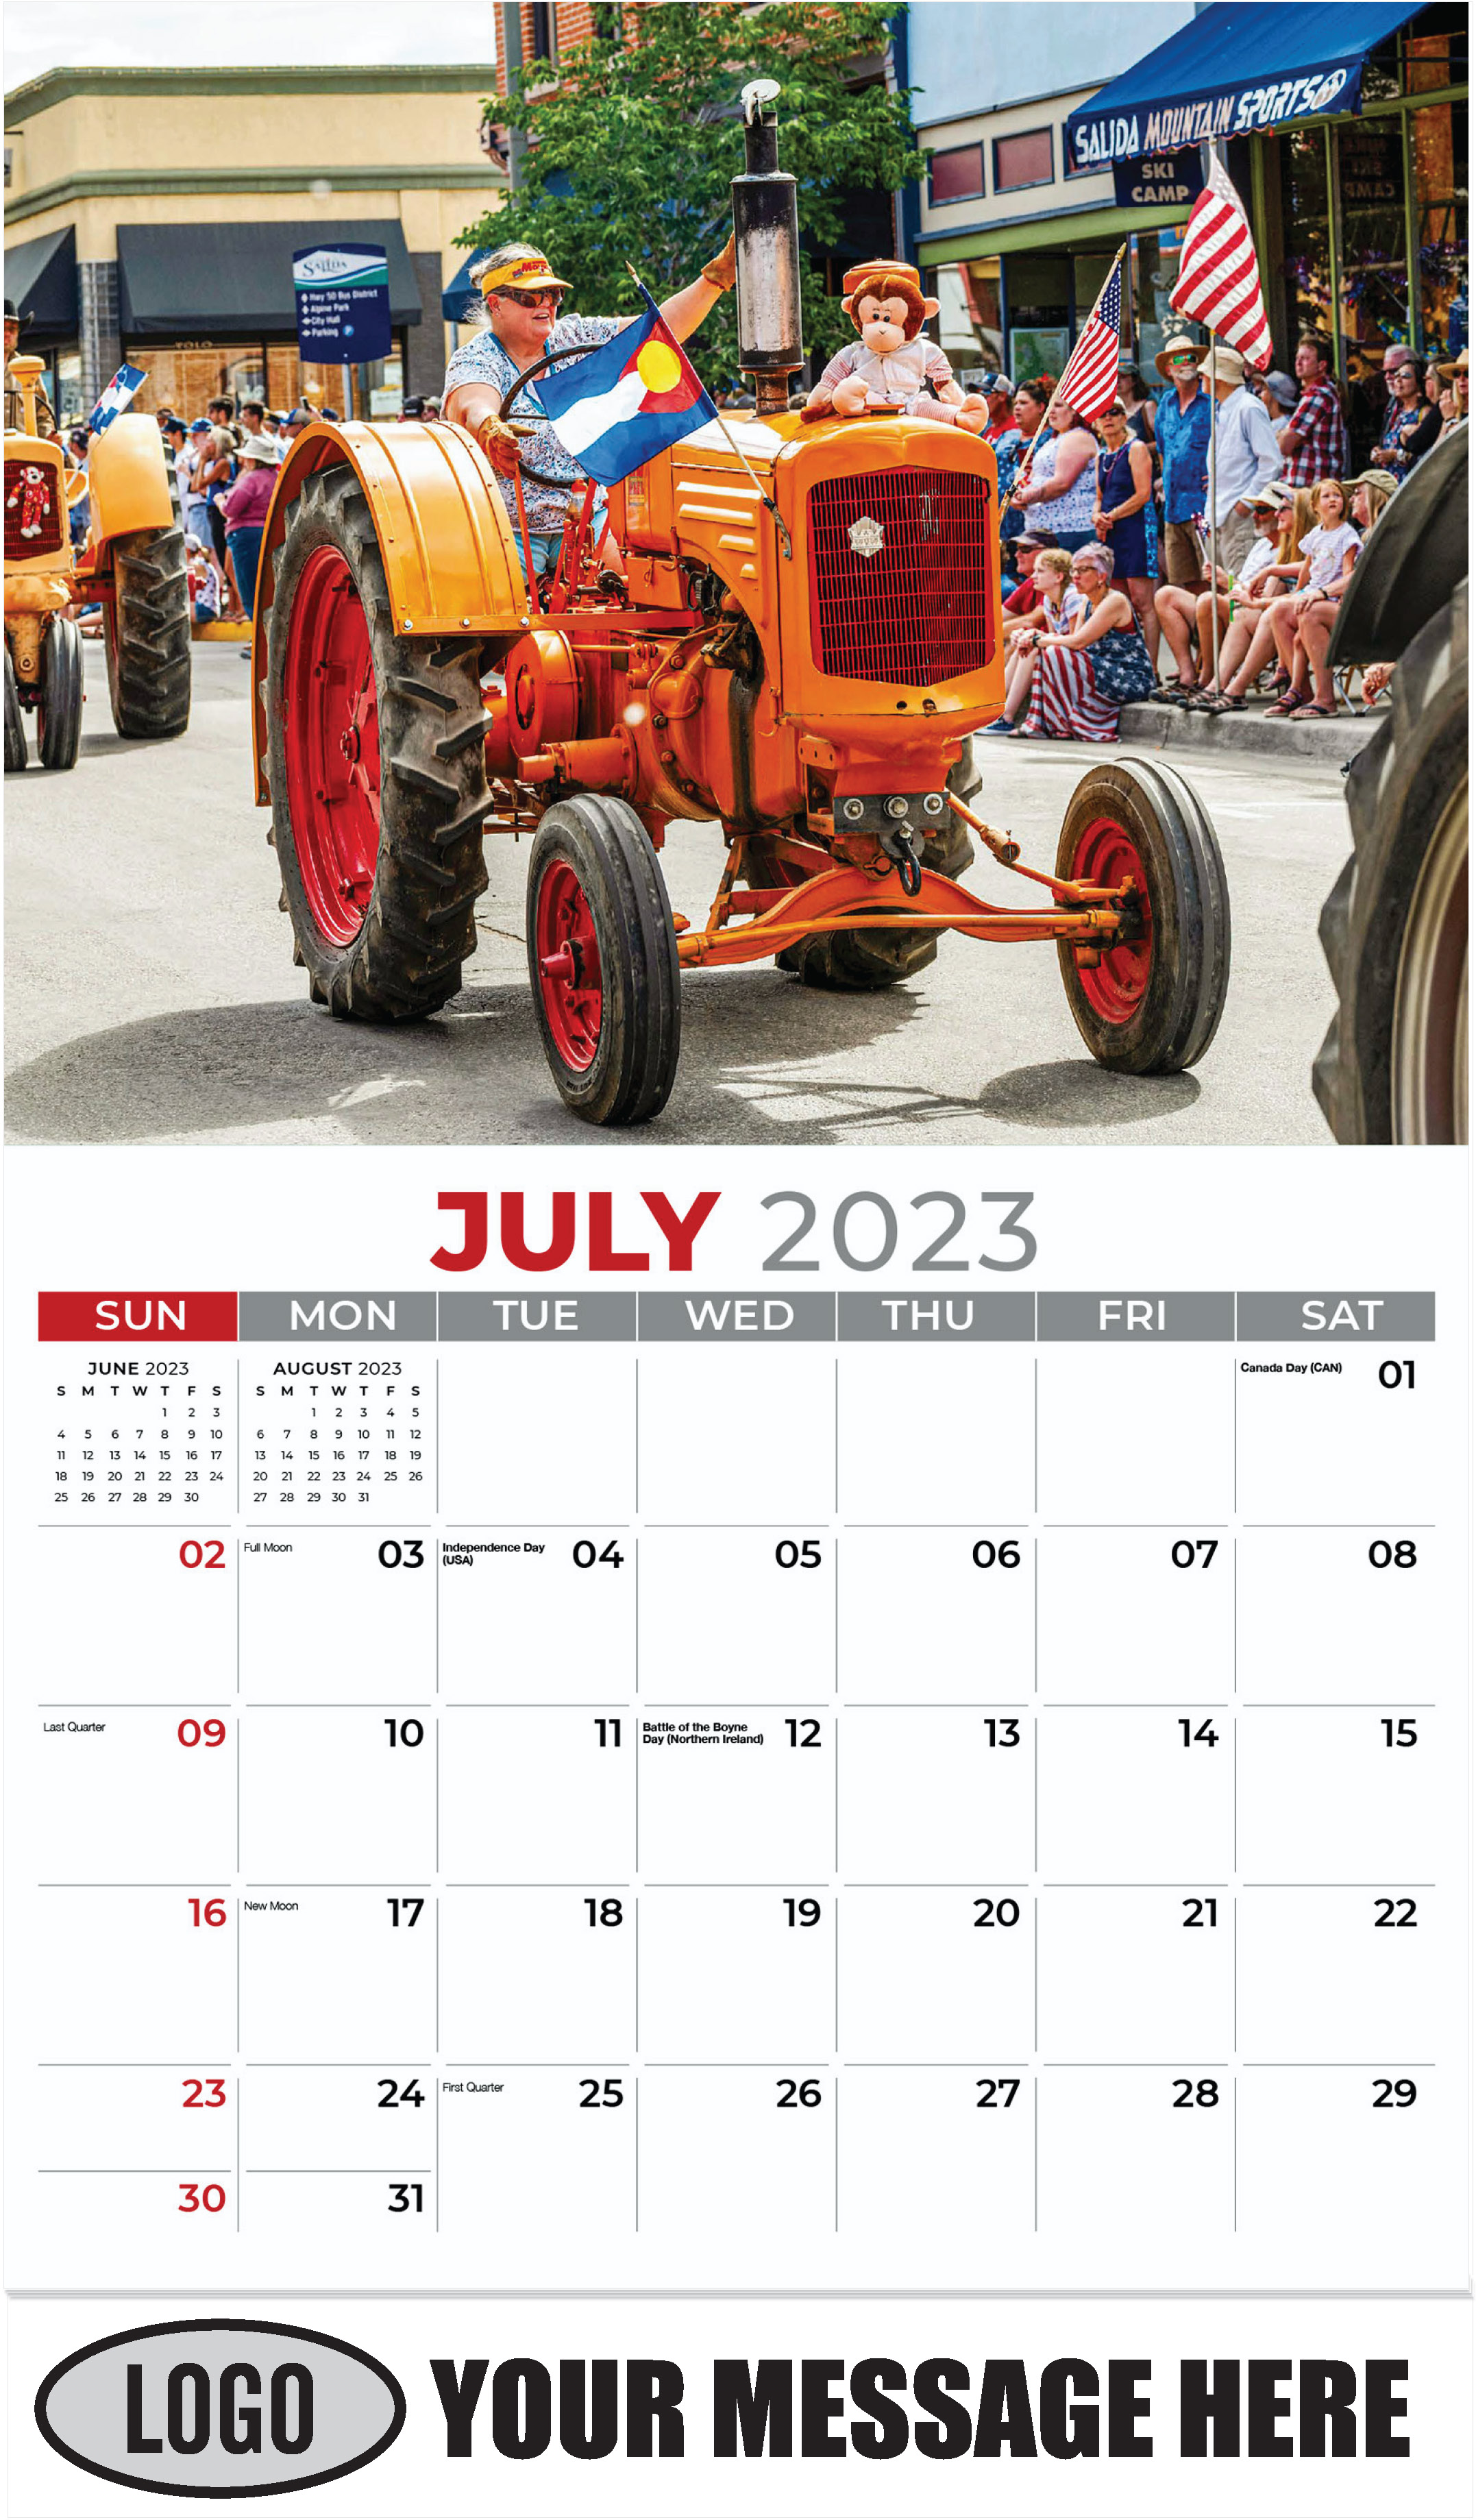 Field of Cows - July - Country Spirit 2023 Promotional Calendar